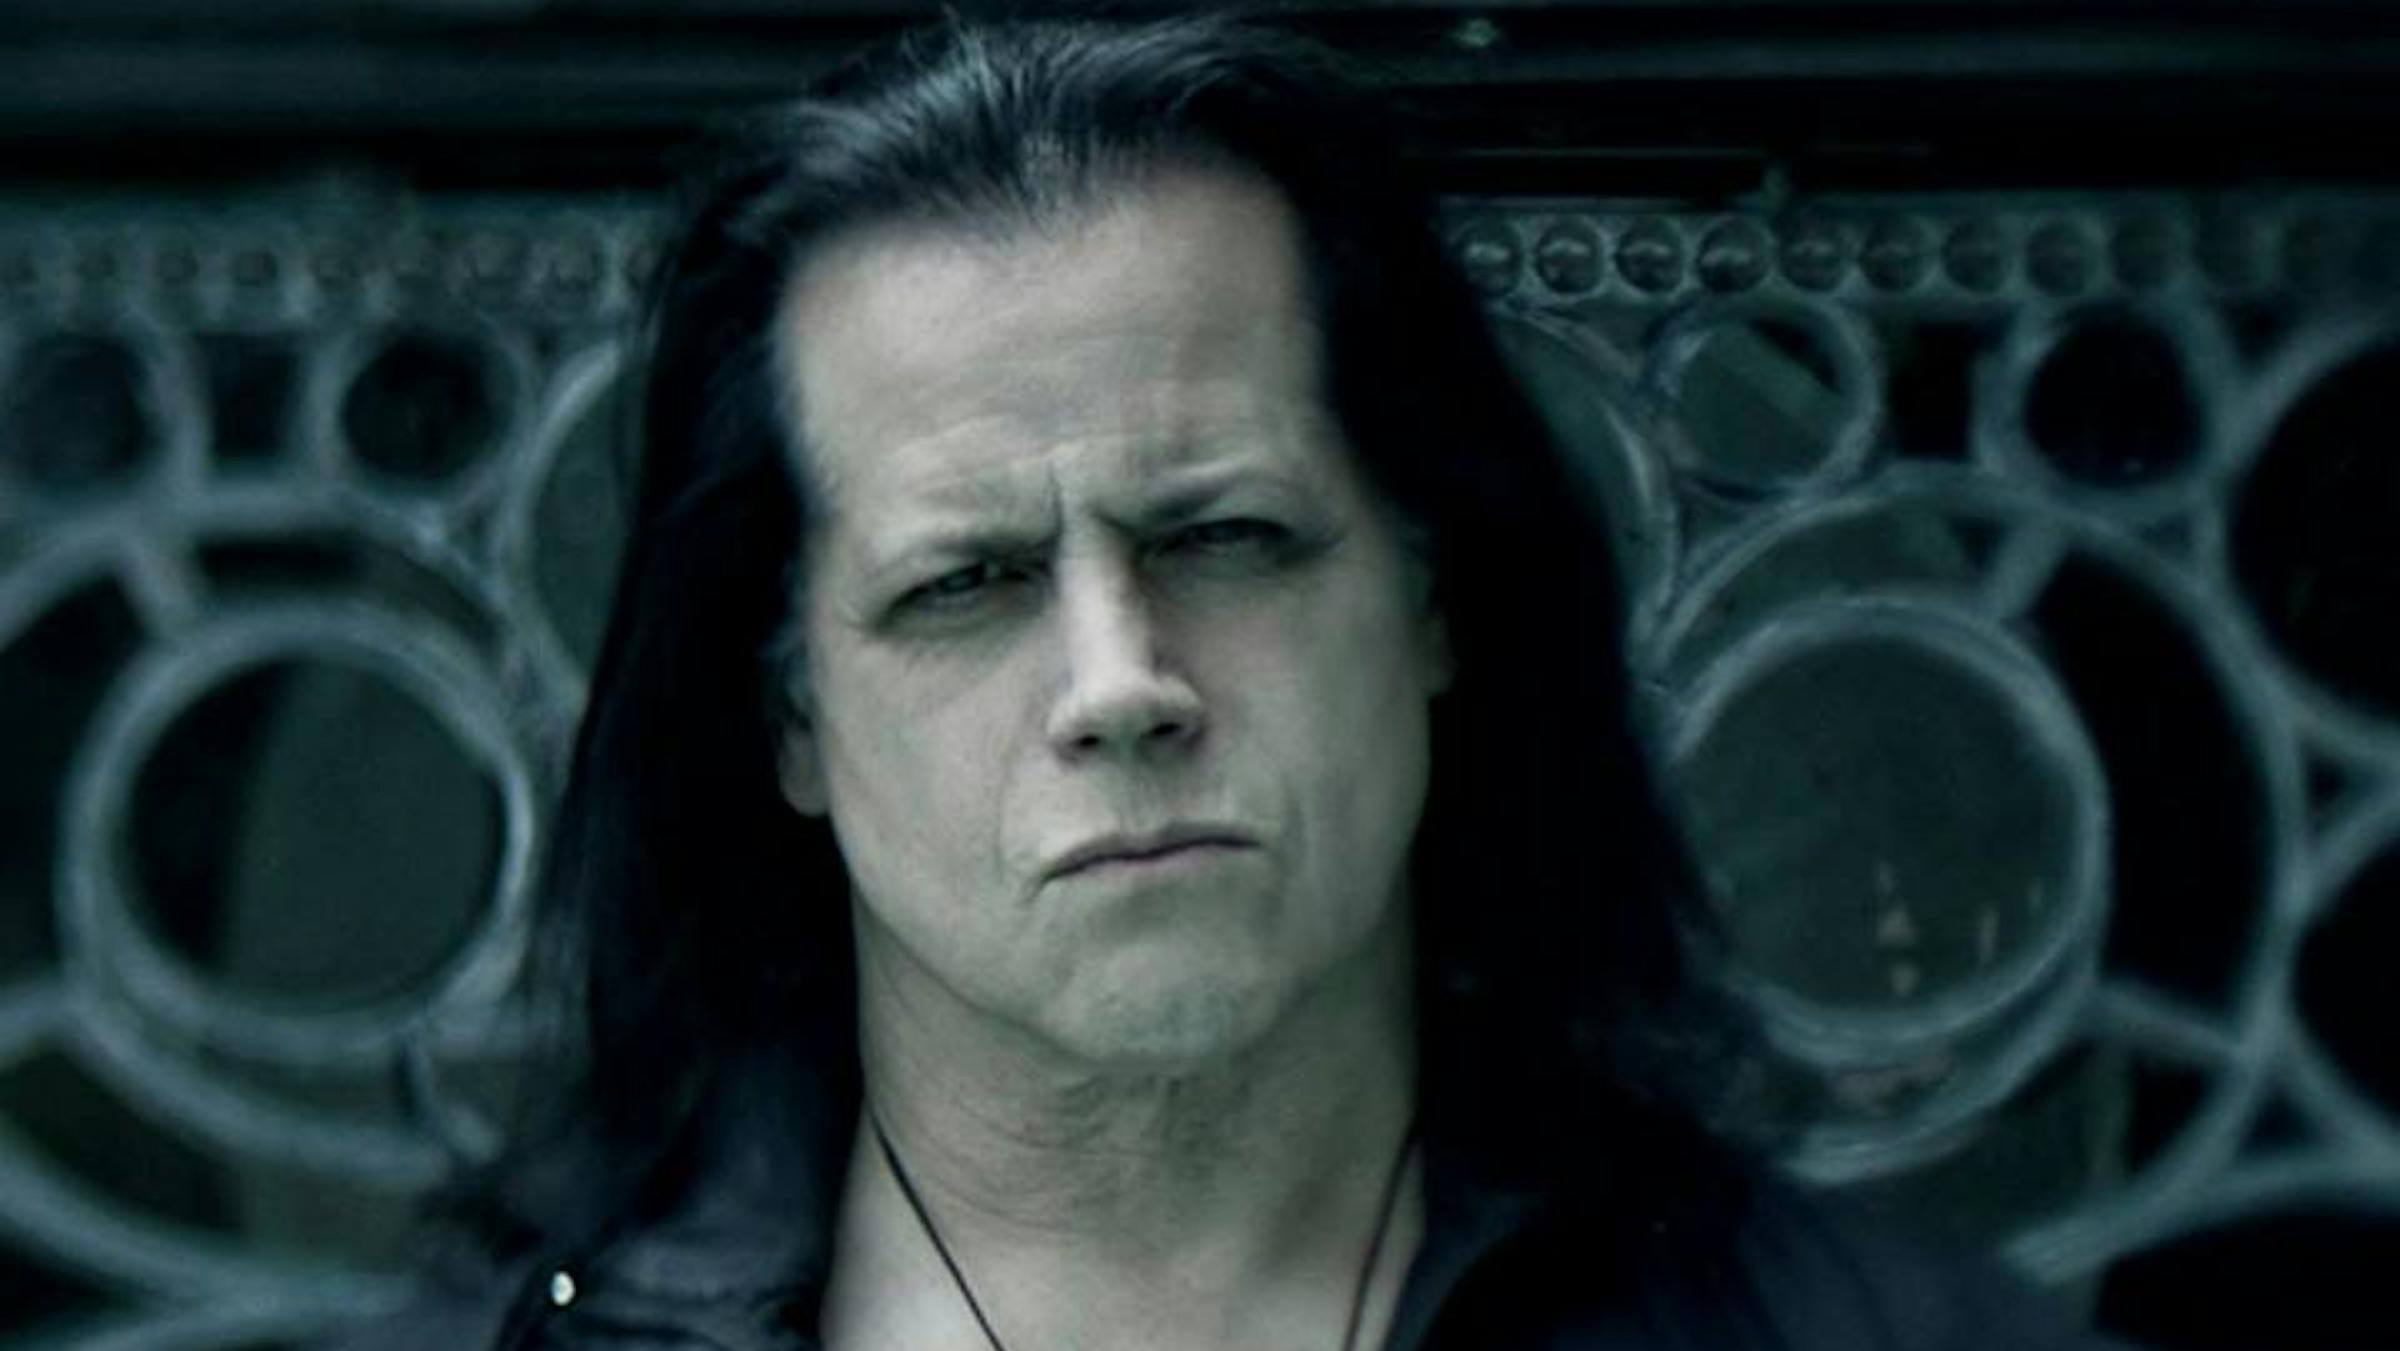 Danzig's Horror Movie To Premiere This June